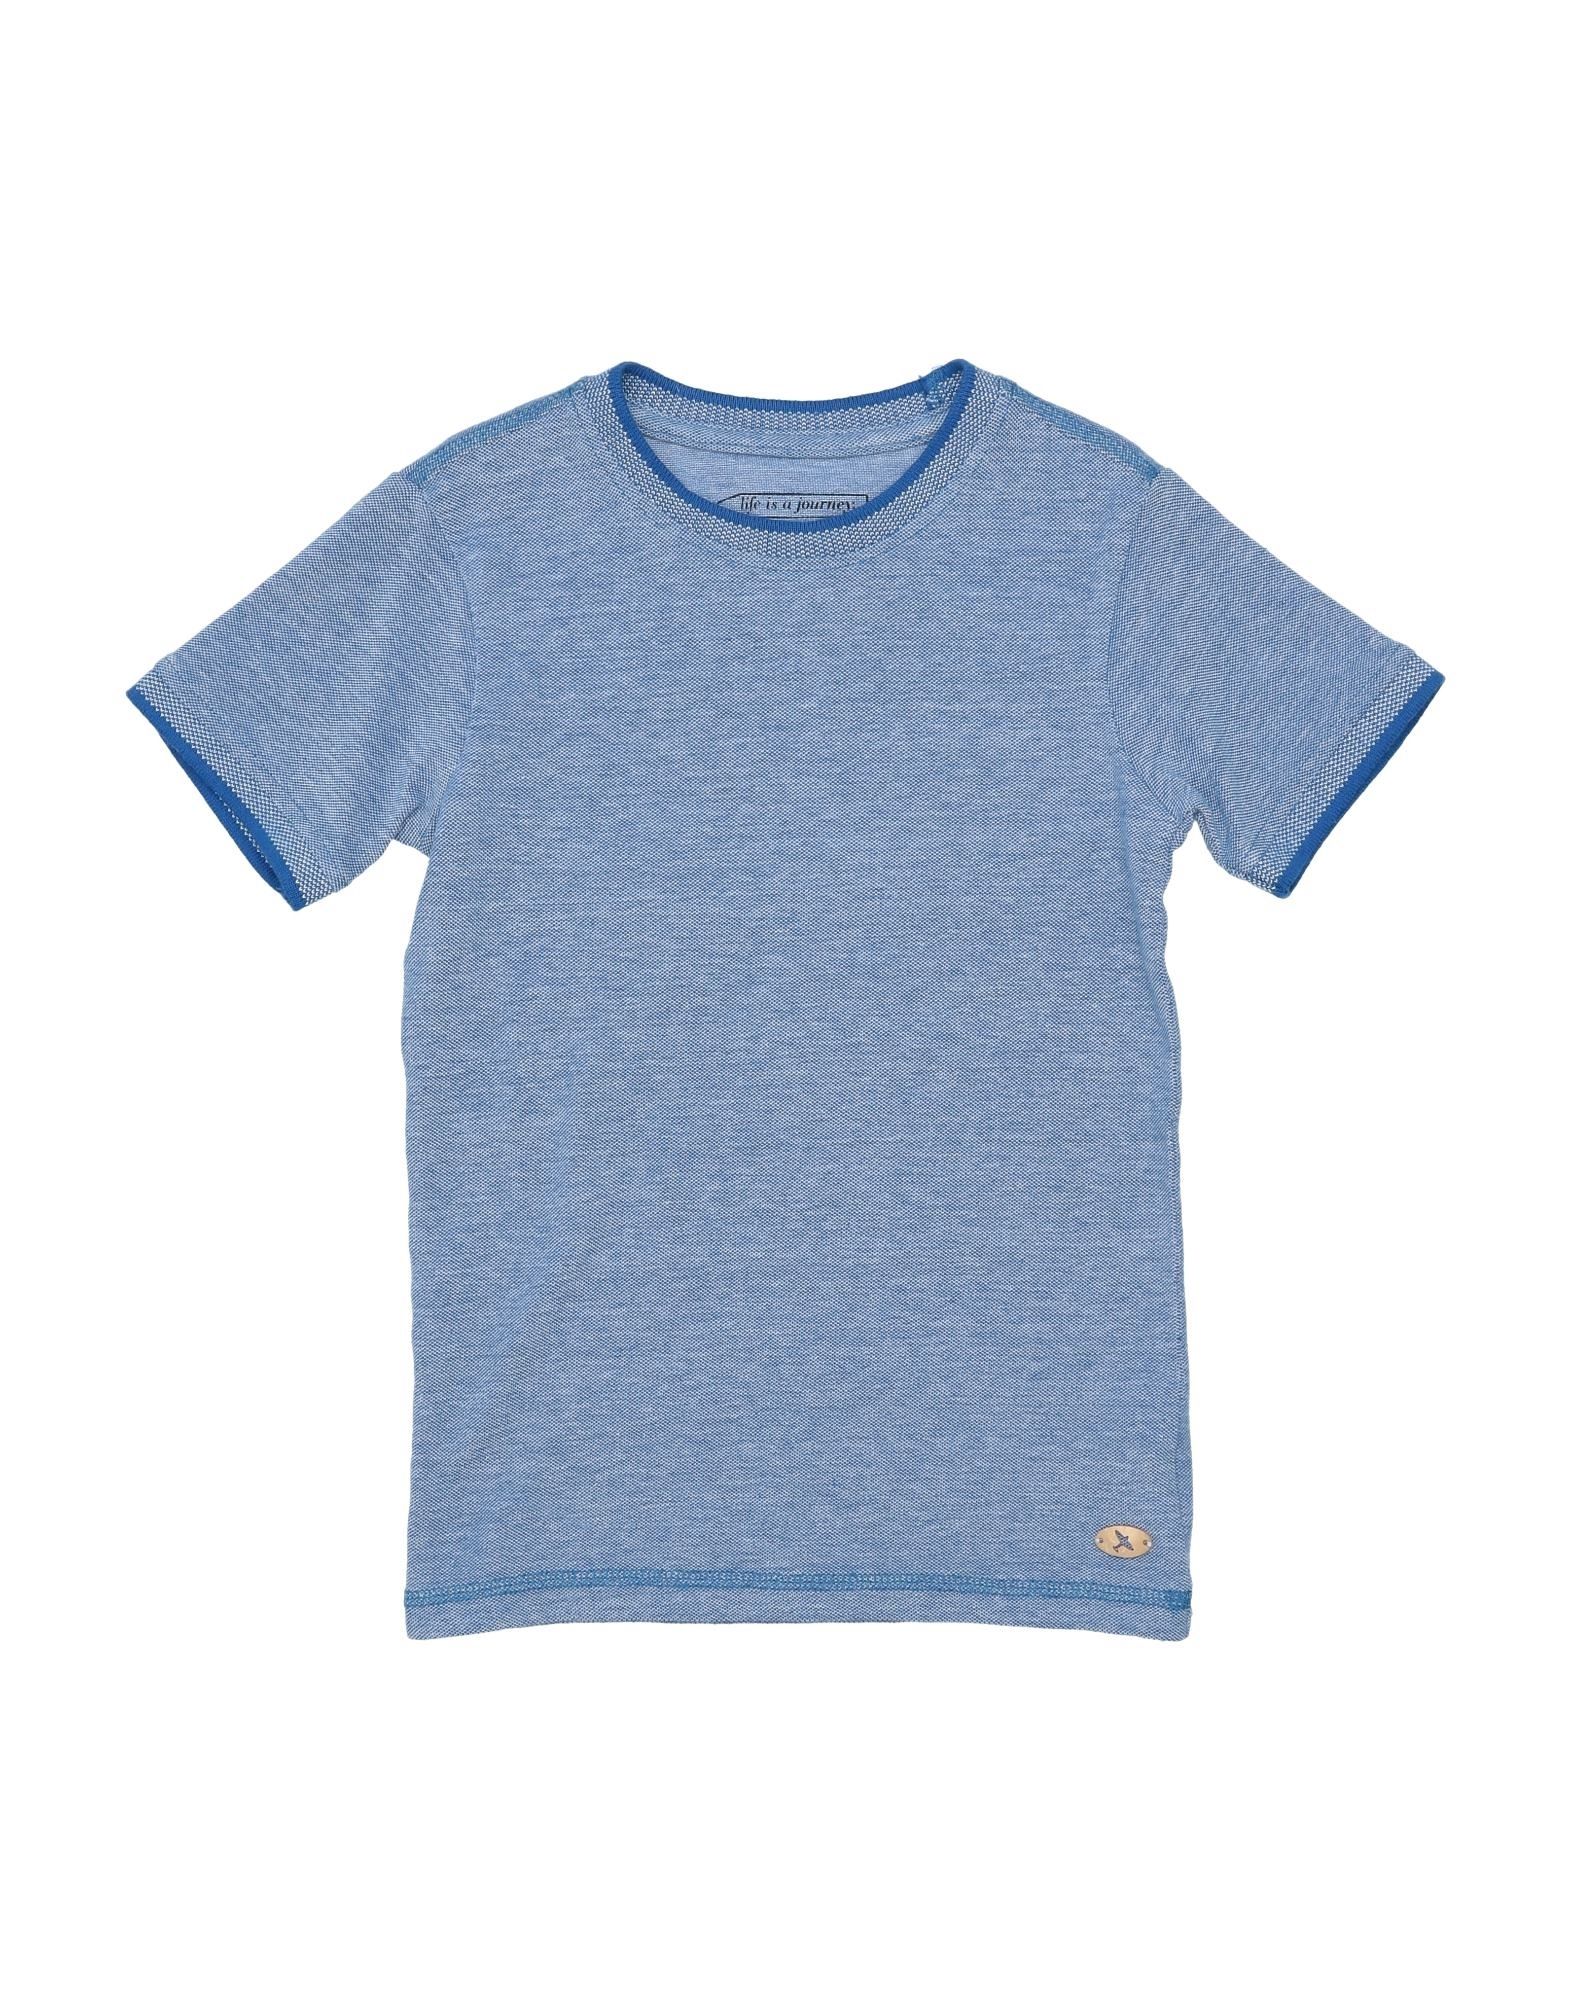 Sp1 Kids' T-shirts In Bright Blue